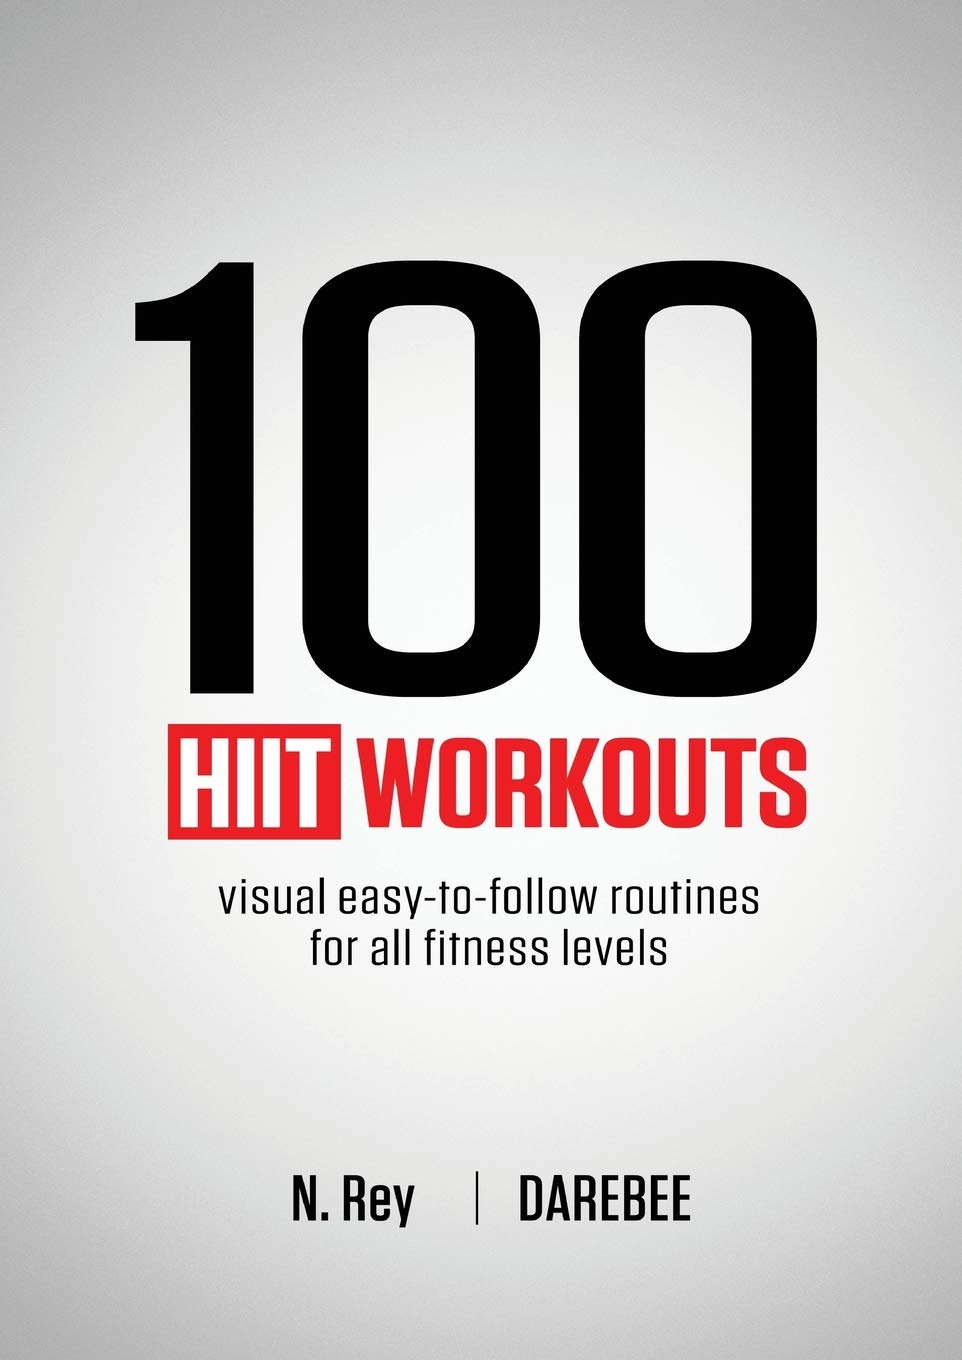 100 HIIT Workouts: Visual easy-to-follow routines for all fitness levels     Paperback – Illustrated, March 16, 2019